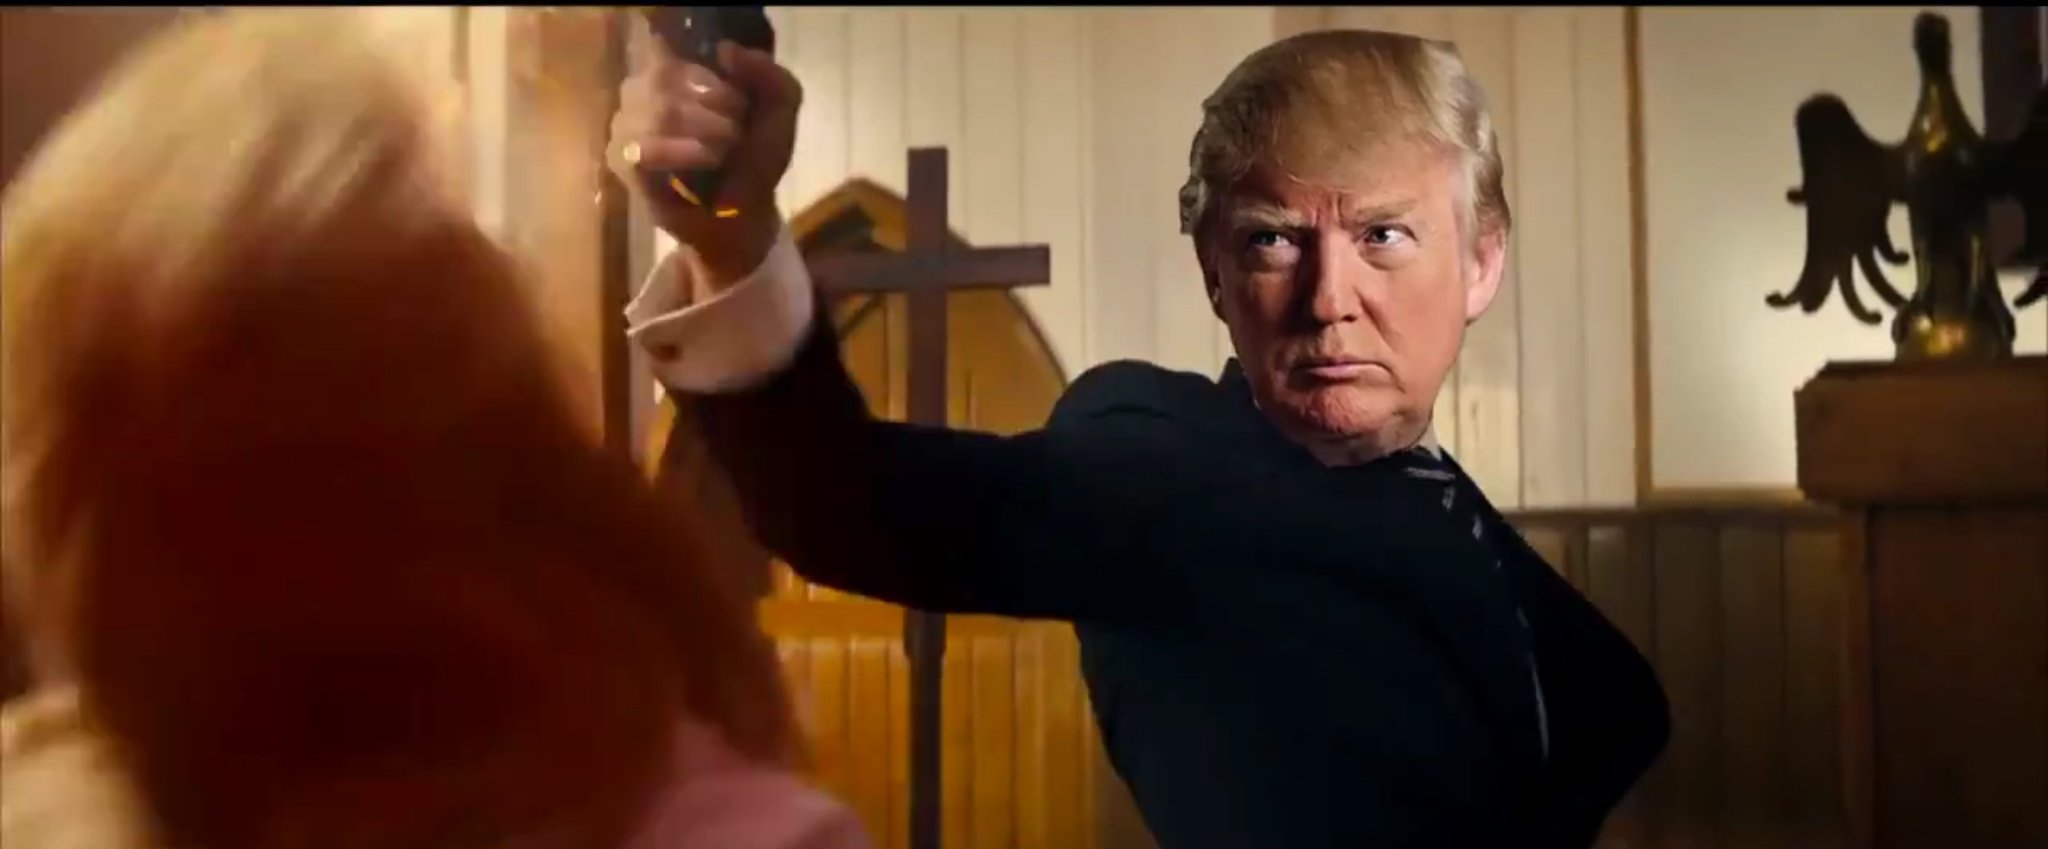 Scene from a video that shows a fake President Donald Trump staging a mass shooting at “The Church of Fake News,” screenshot taken Oct. 14, 2019. Twitter screenshot.